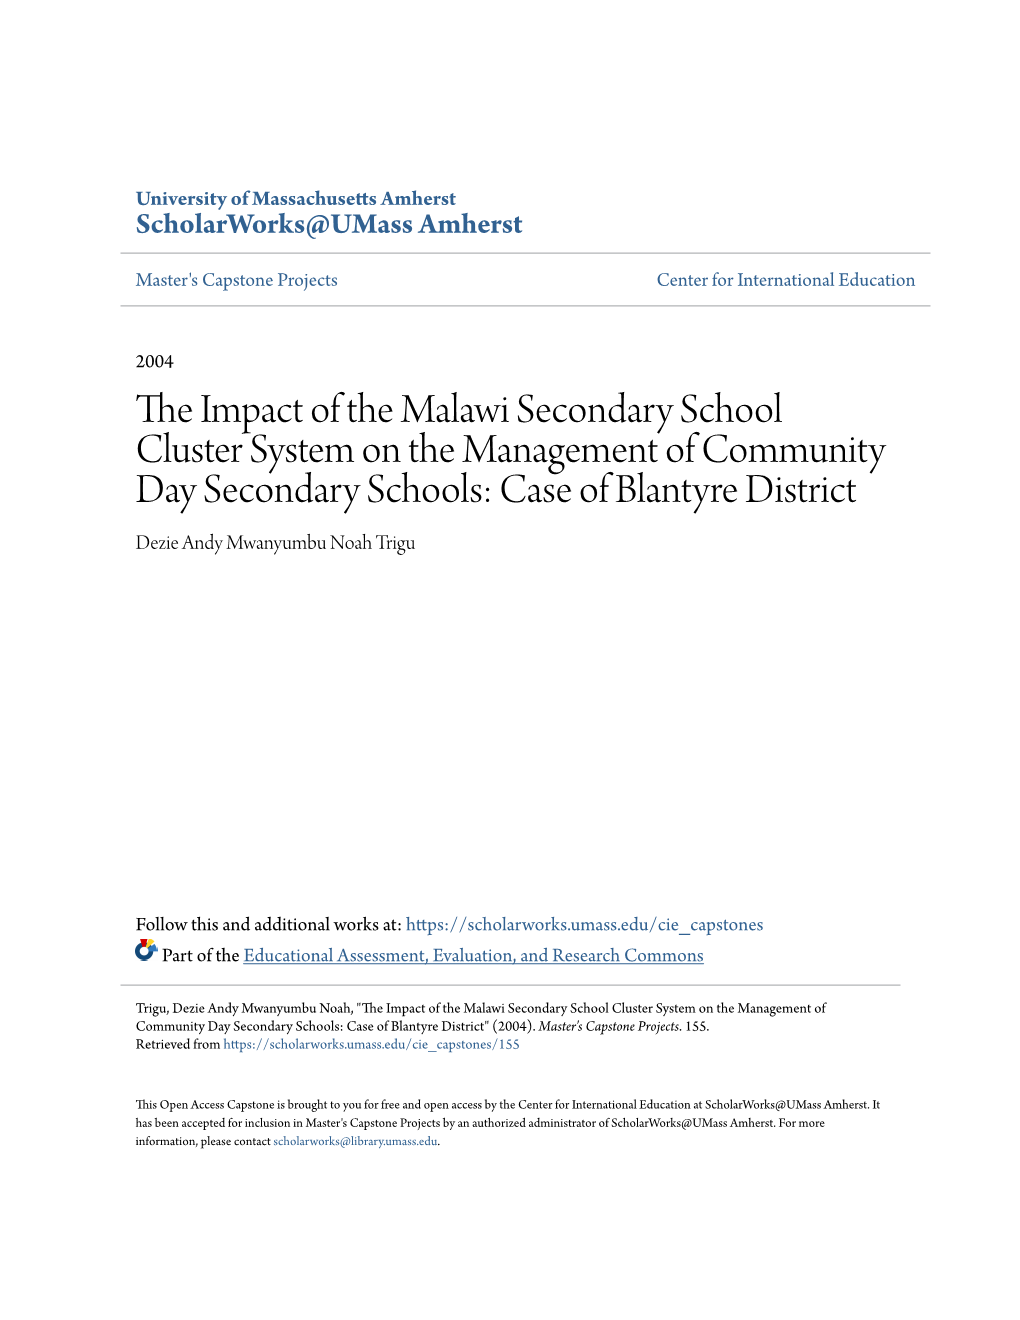 The Impact of the Malawi Secondary School Cluster System on the Management of Community Day Secondary Schools: Case of Blantyre